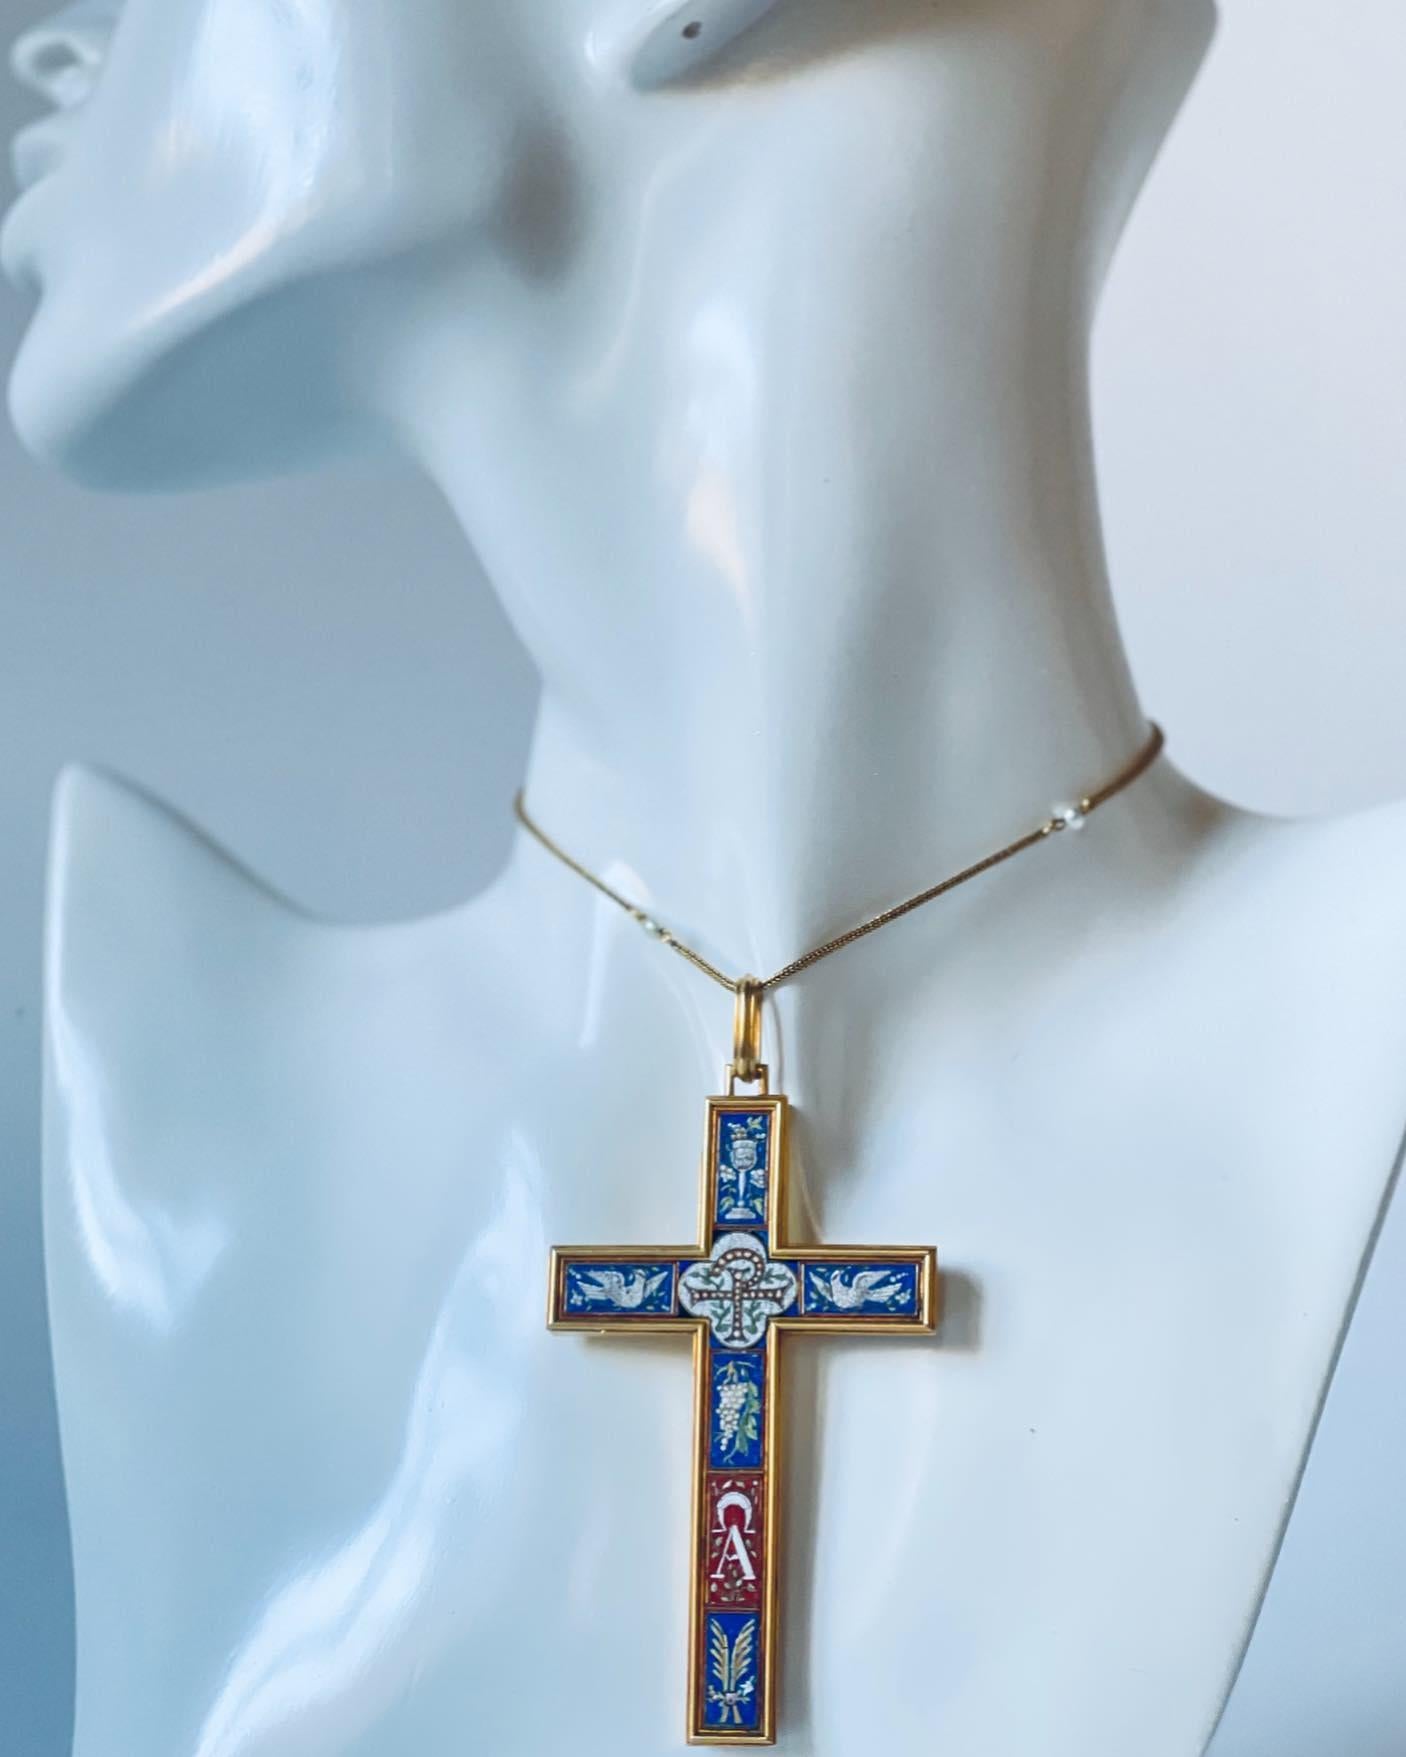 A wonderful 19th Century French micromosaic cross pendant in 18K yellow gold. The cross features a nicely detailed micromosaic inlay of a staurogram symbol in the centre, the Alpha & Omega symbols at the bottom, and a white dove of peace to either